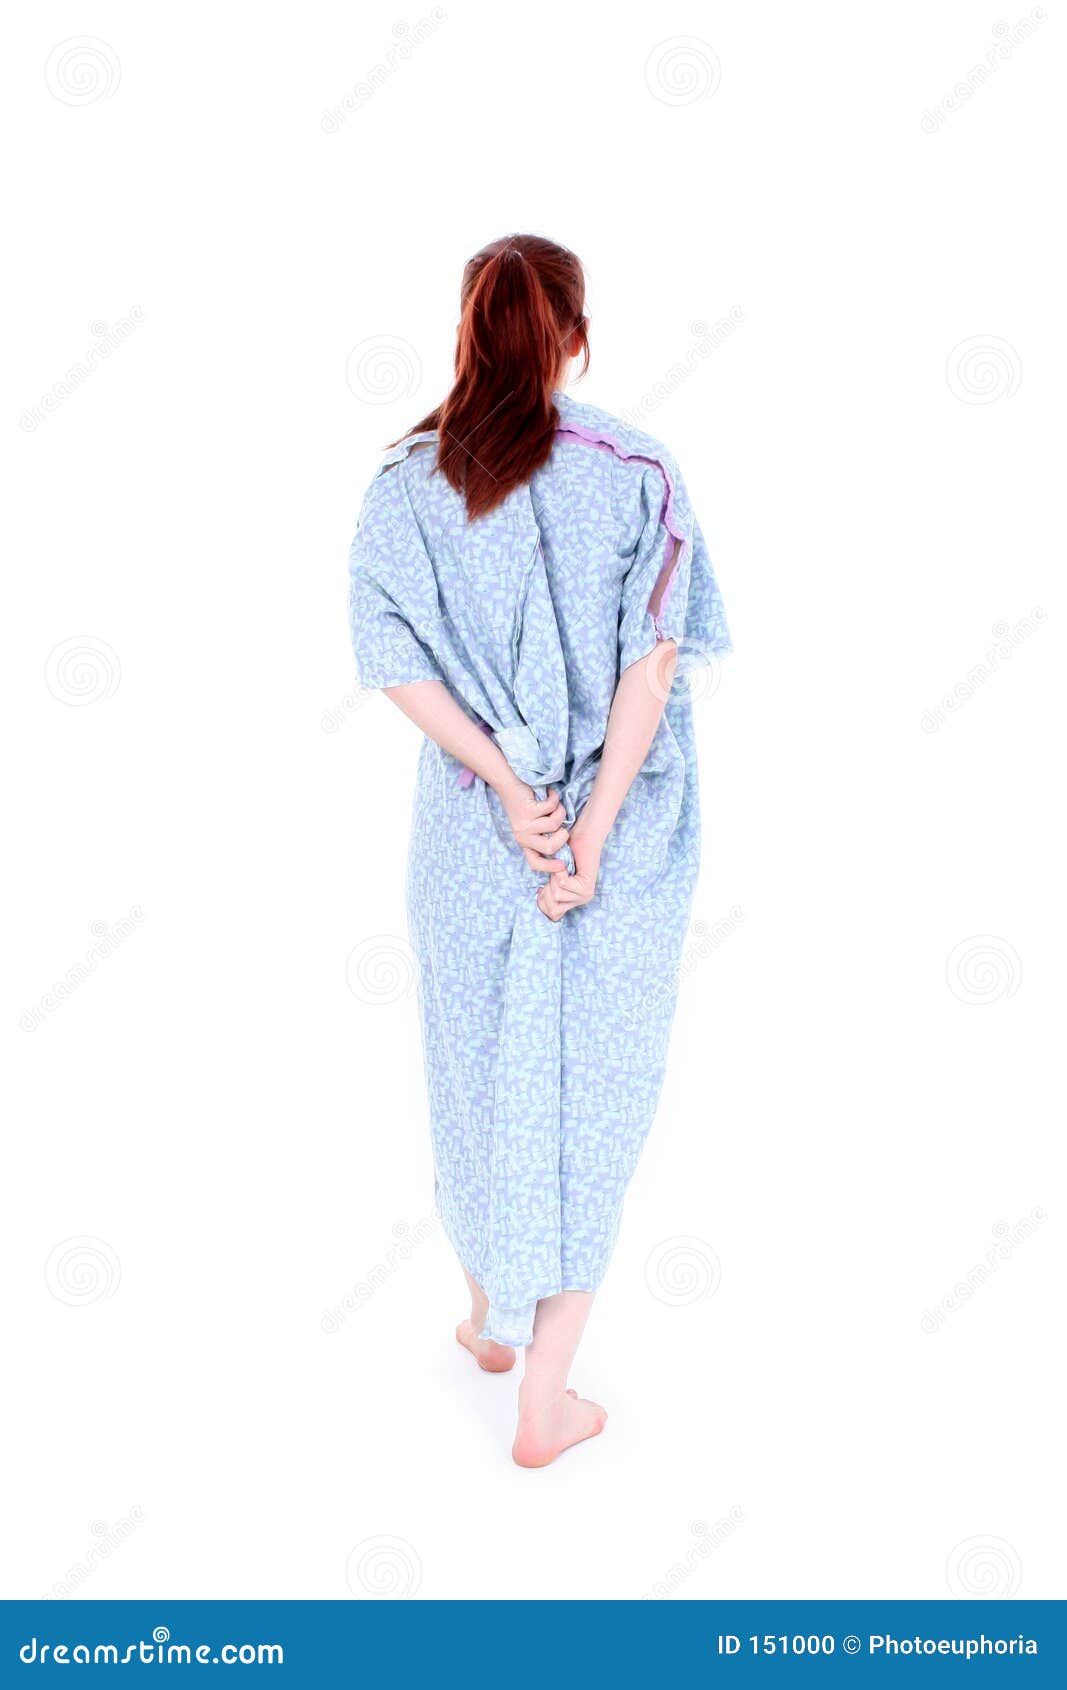 LUXCARE Comfortable Hospital Gowns for Men and Women ~ Unisex Patient  Medical Gowns Fits All Sizes up to 2XL, Easy-on Hospital Gown for Elderly,  Hospice, Home Care, Labor and Delivery : Amazon.in: